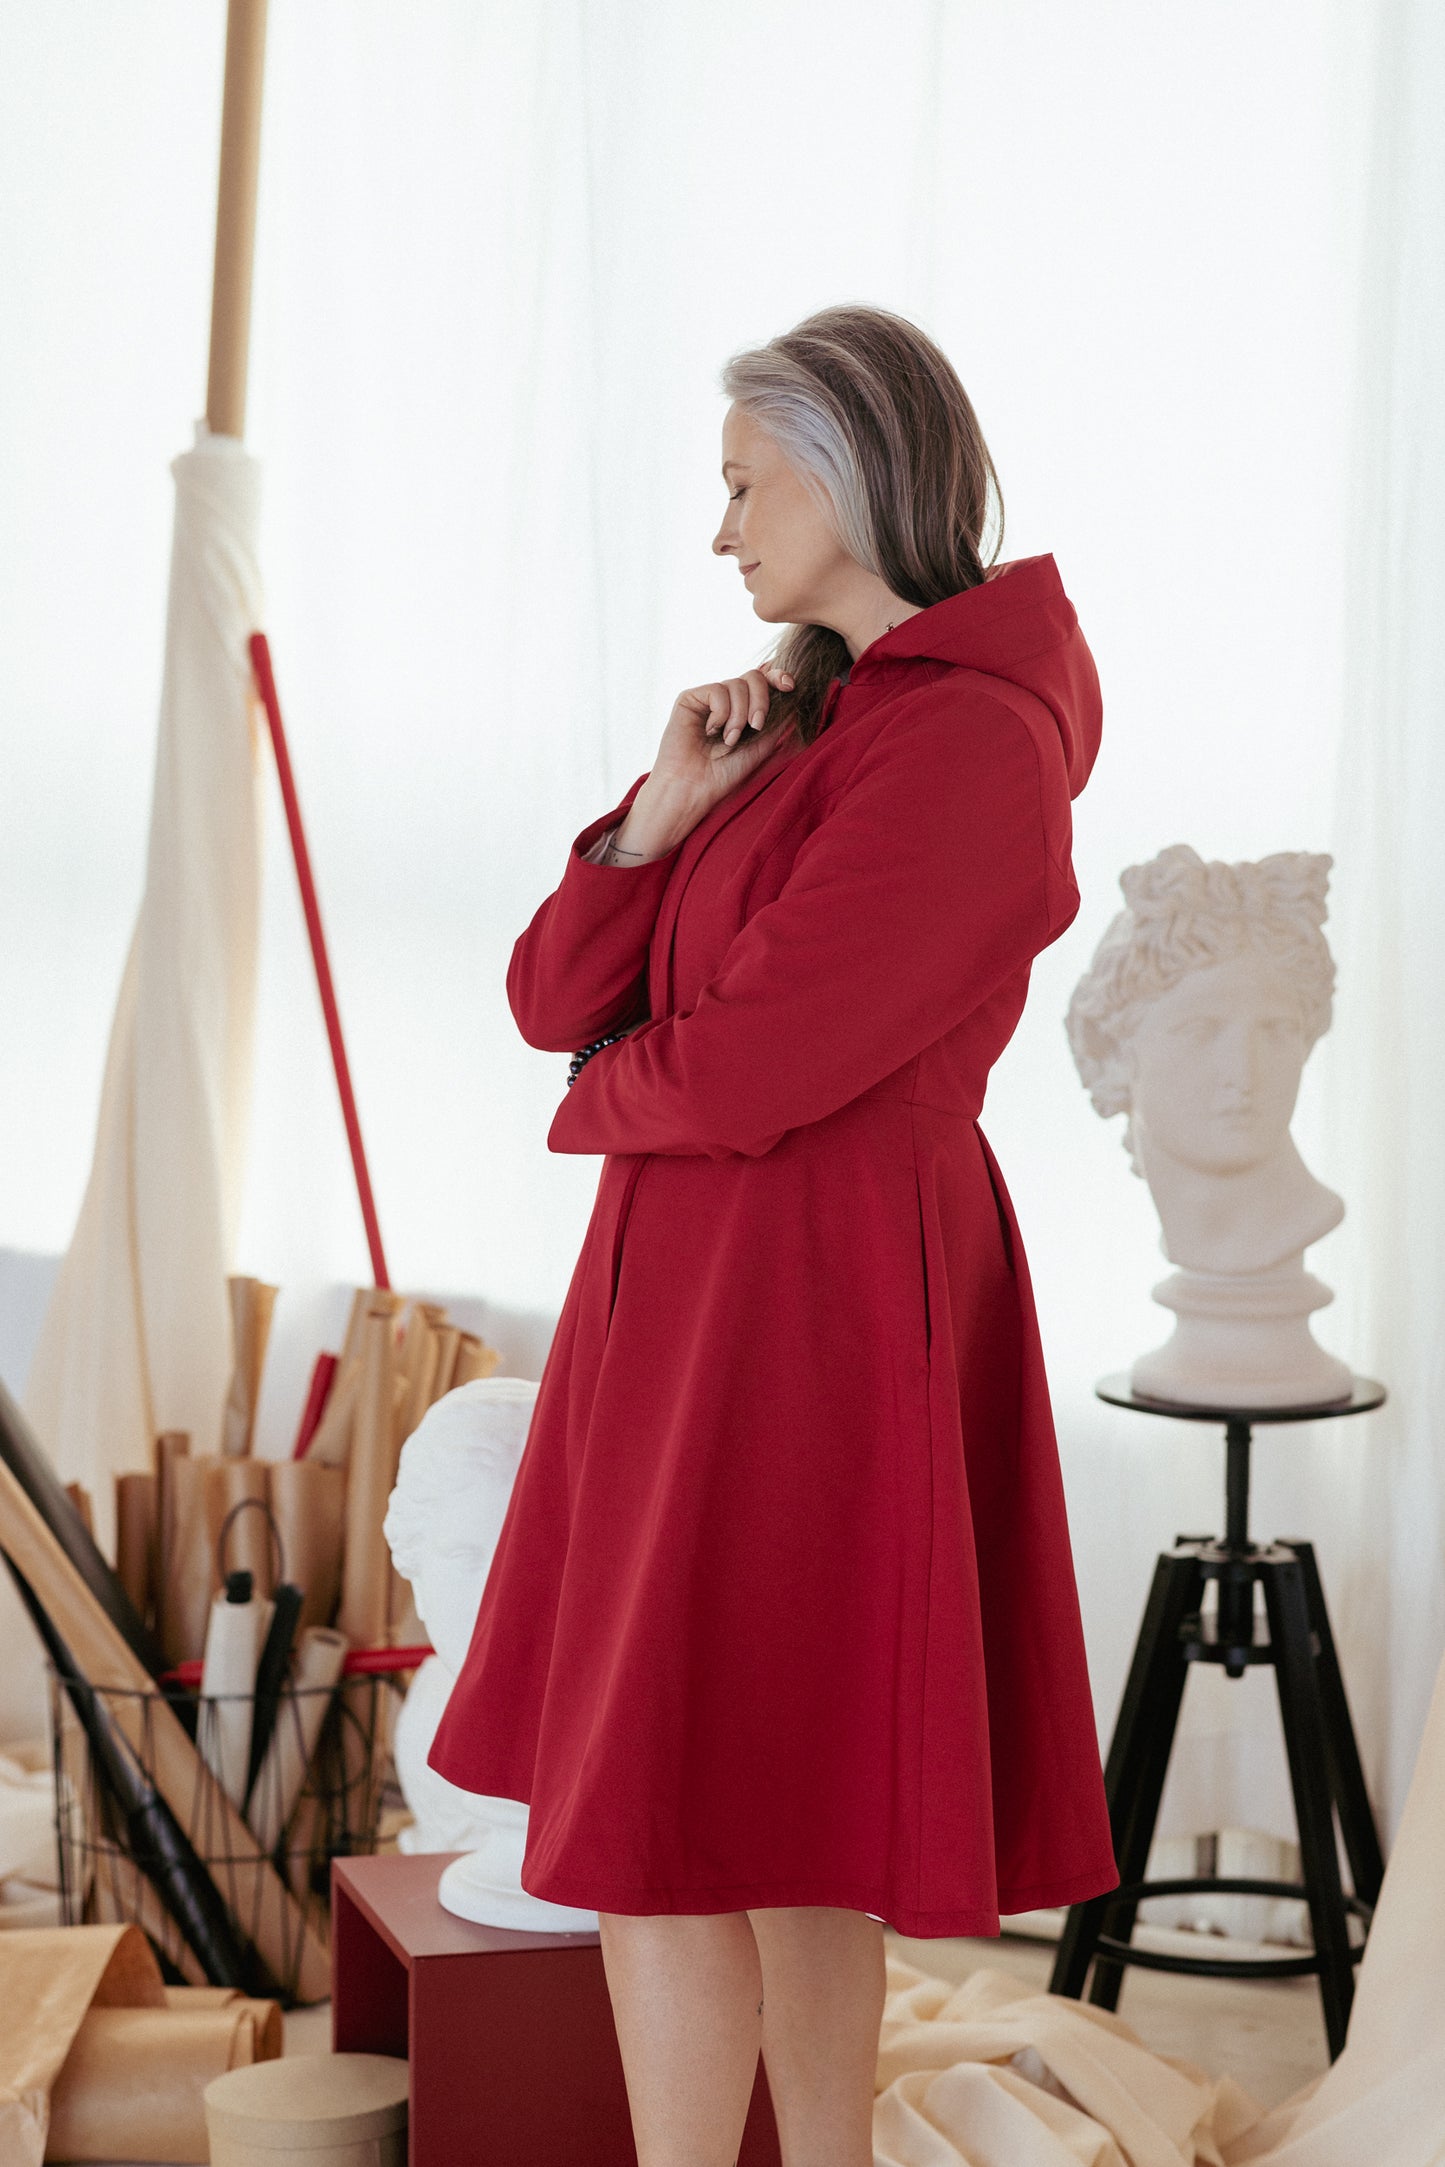 Waterproof Dark Red Coat for Women with full volume skirt and pleating on the back